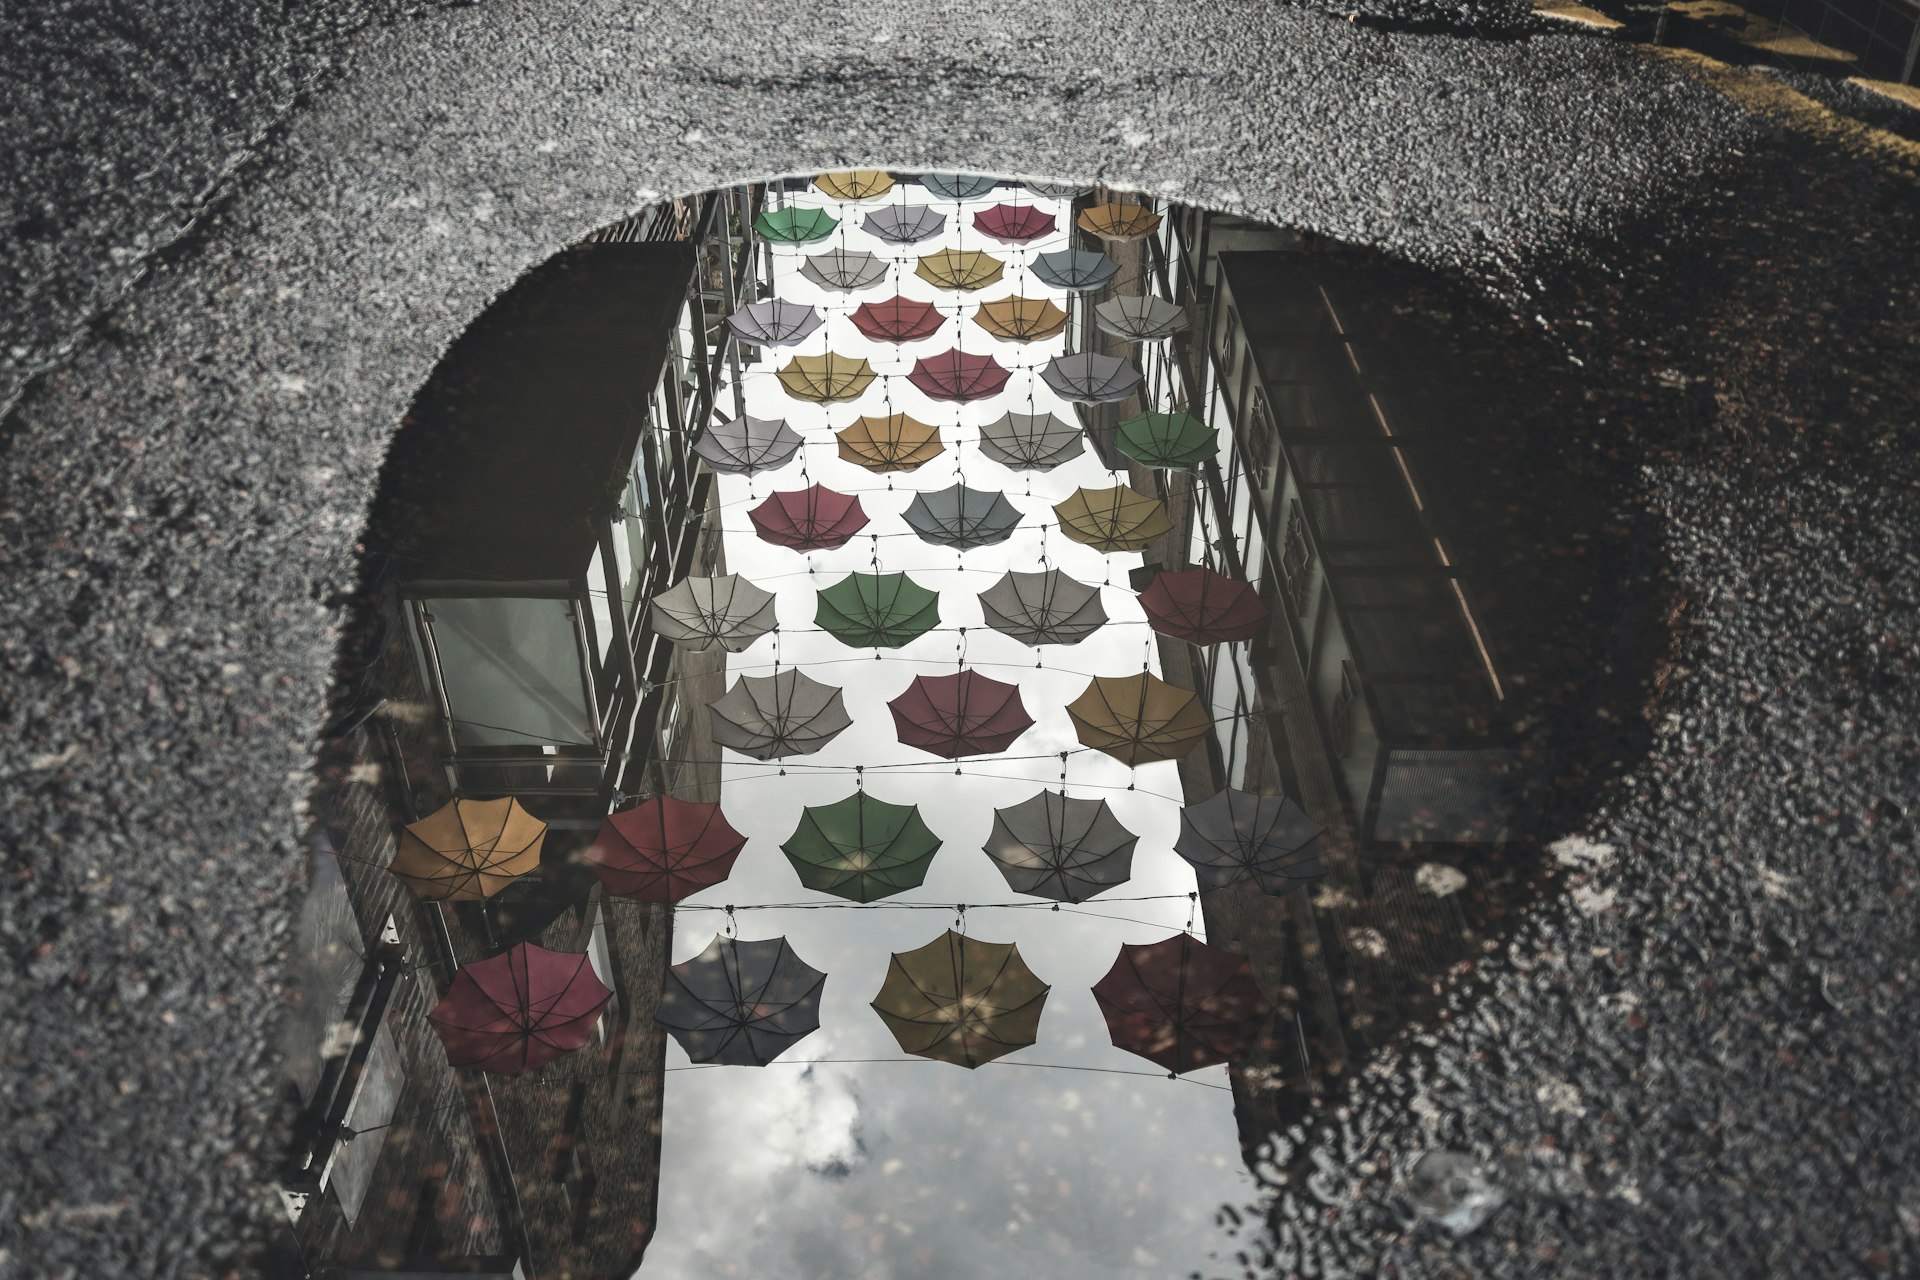 A puddle in a street reflecting a series of colorful umbrellas that are suspended in the sky